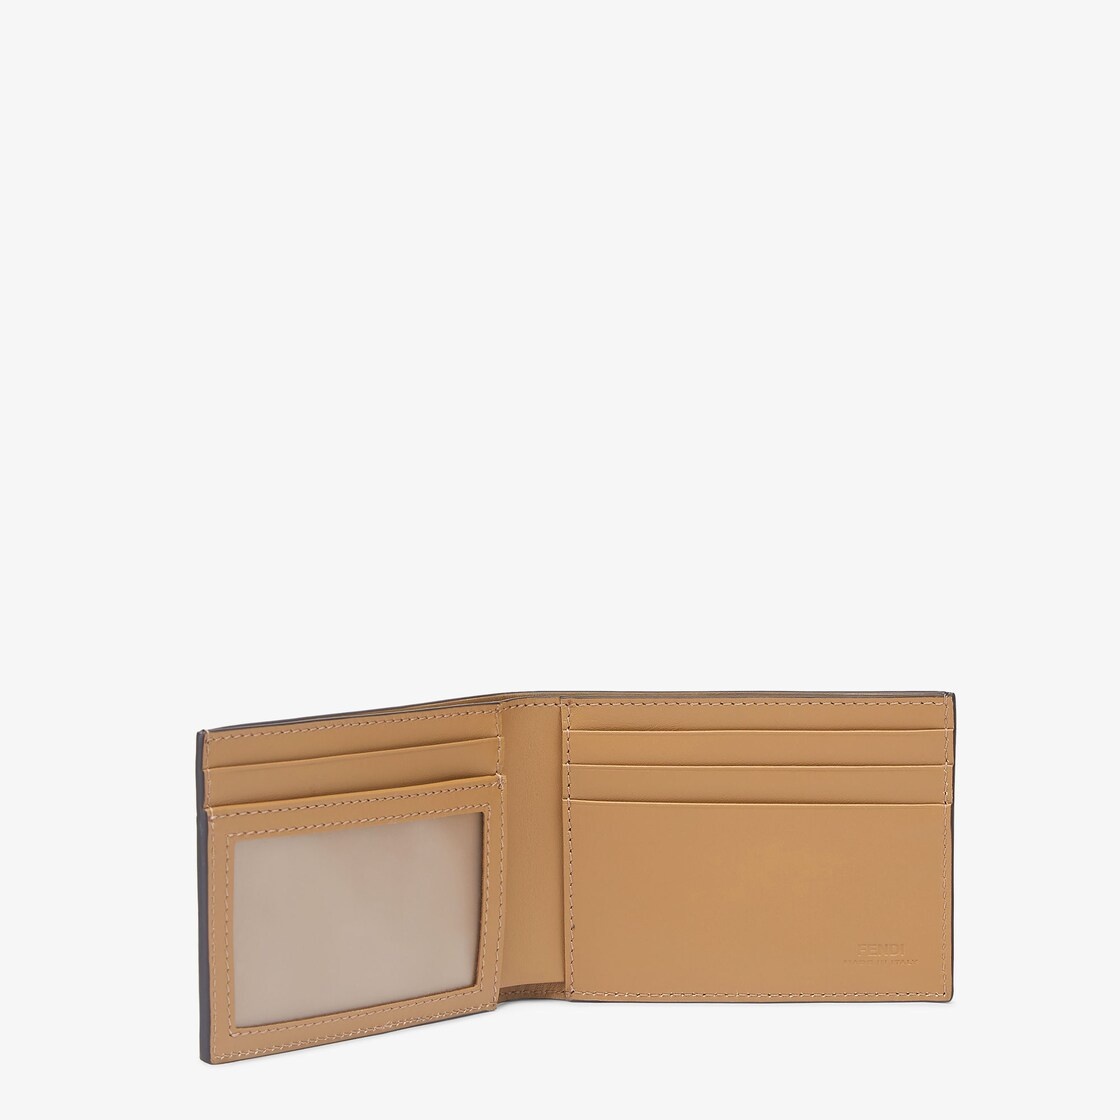 Bi-fold wallet with banknote compartment, four card slots and one coated document pocket with a tran - 3